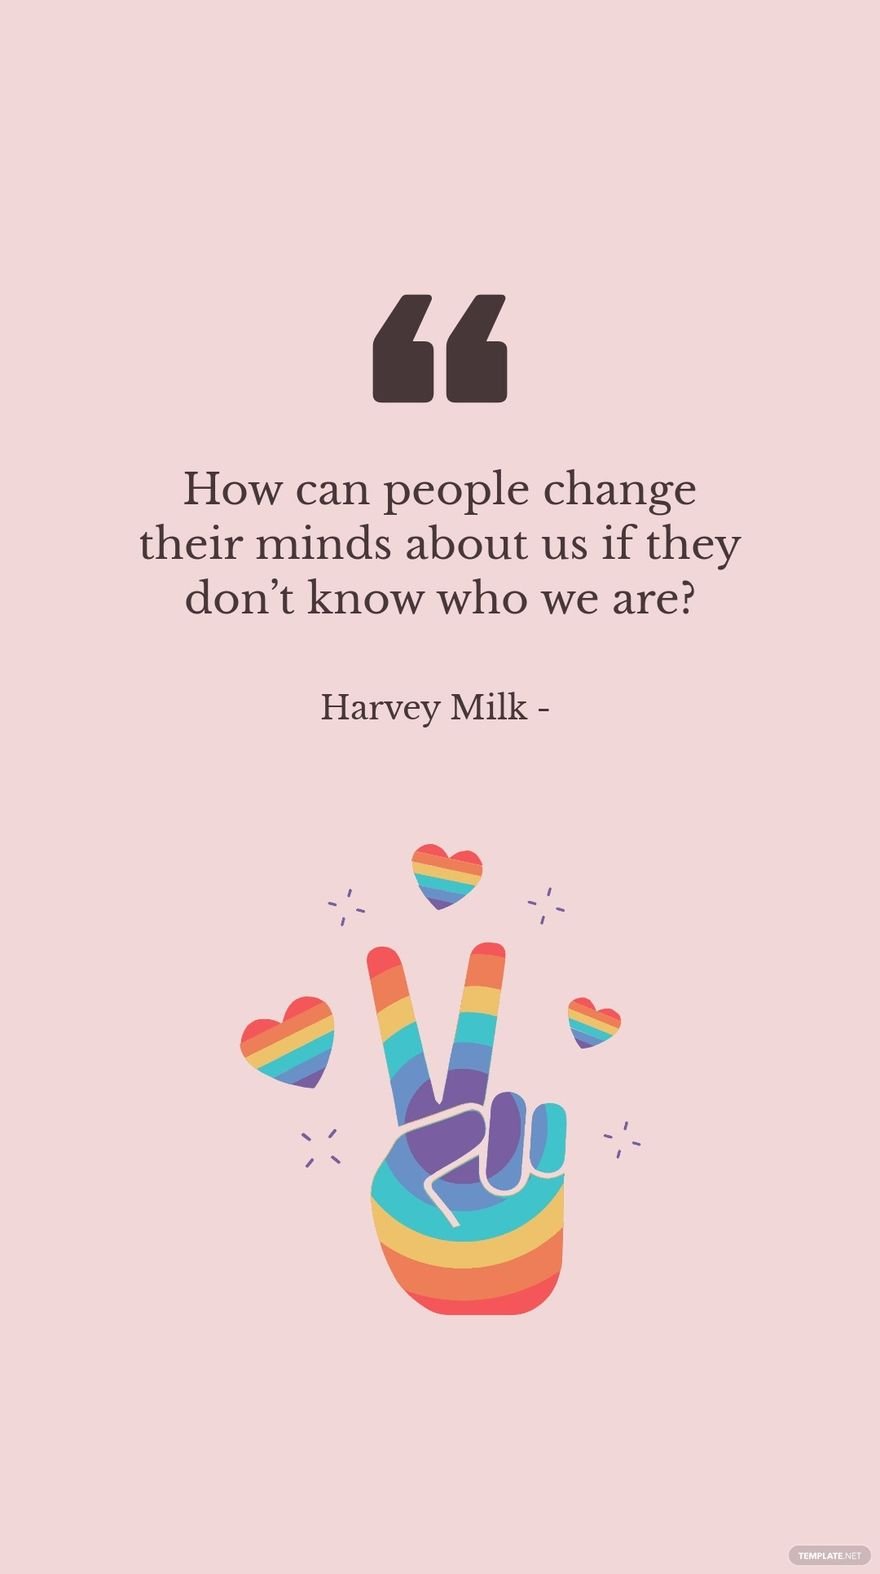 Harvey Milk - How can people change their minds about us if they don’t know who we are?